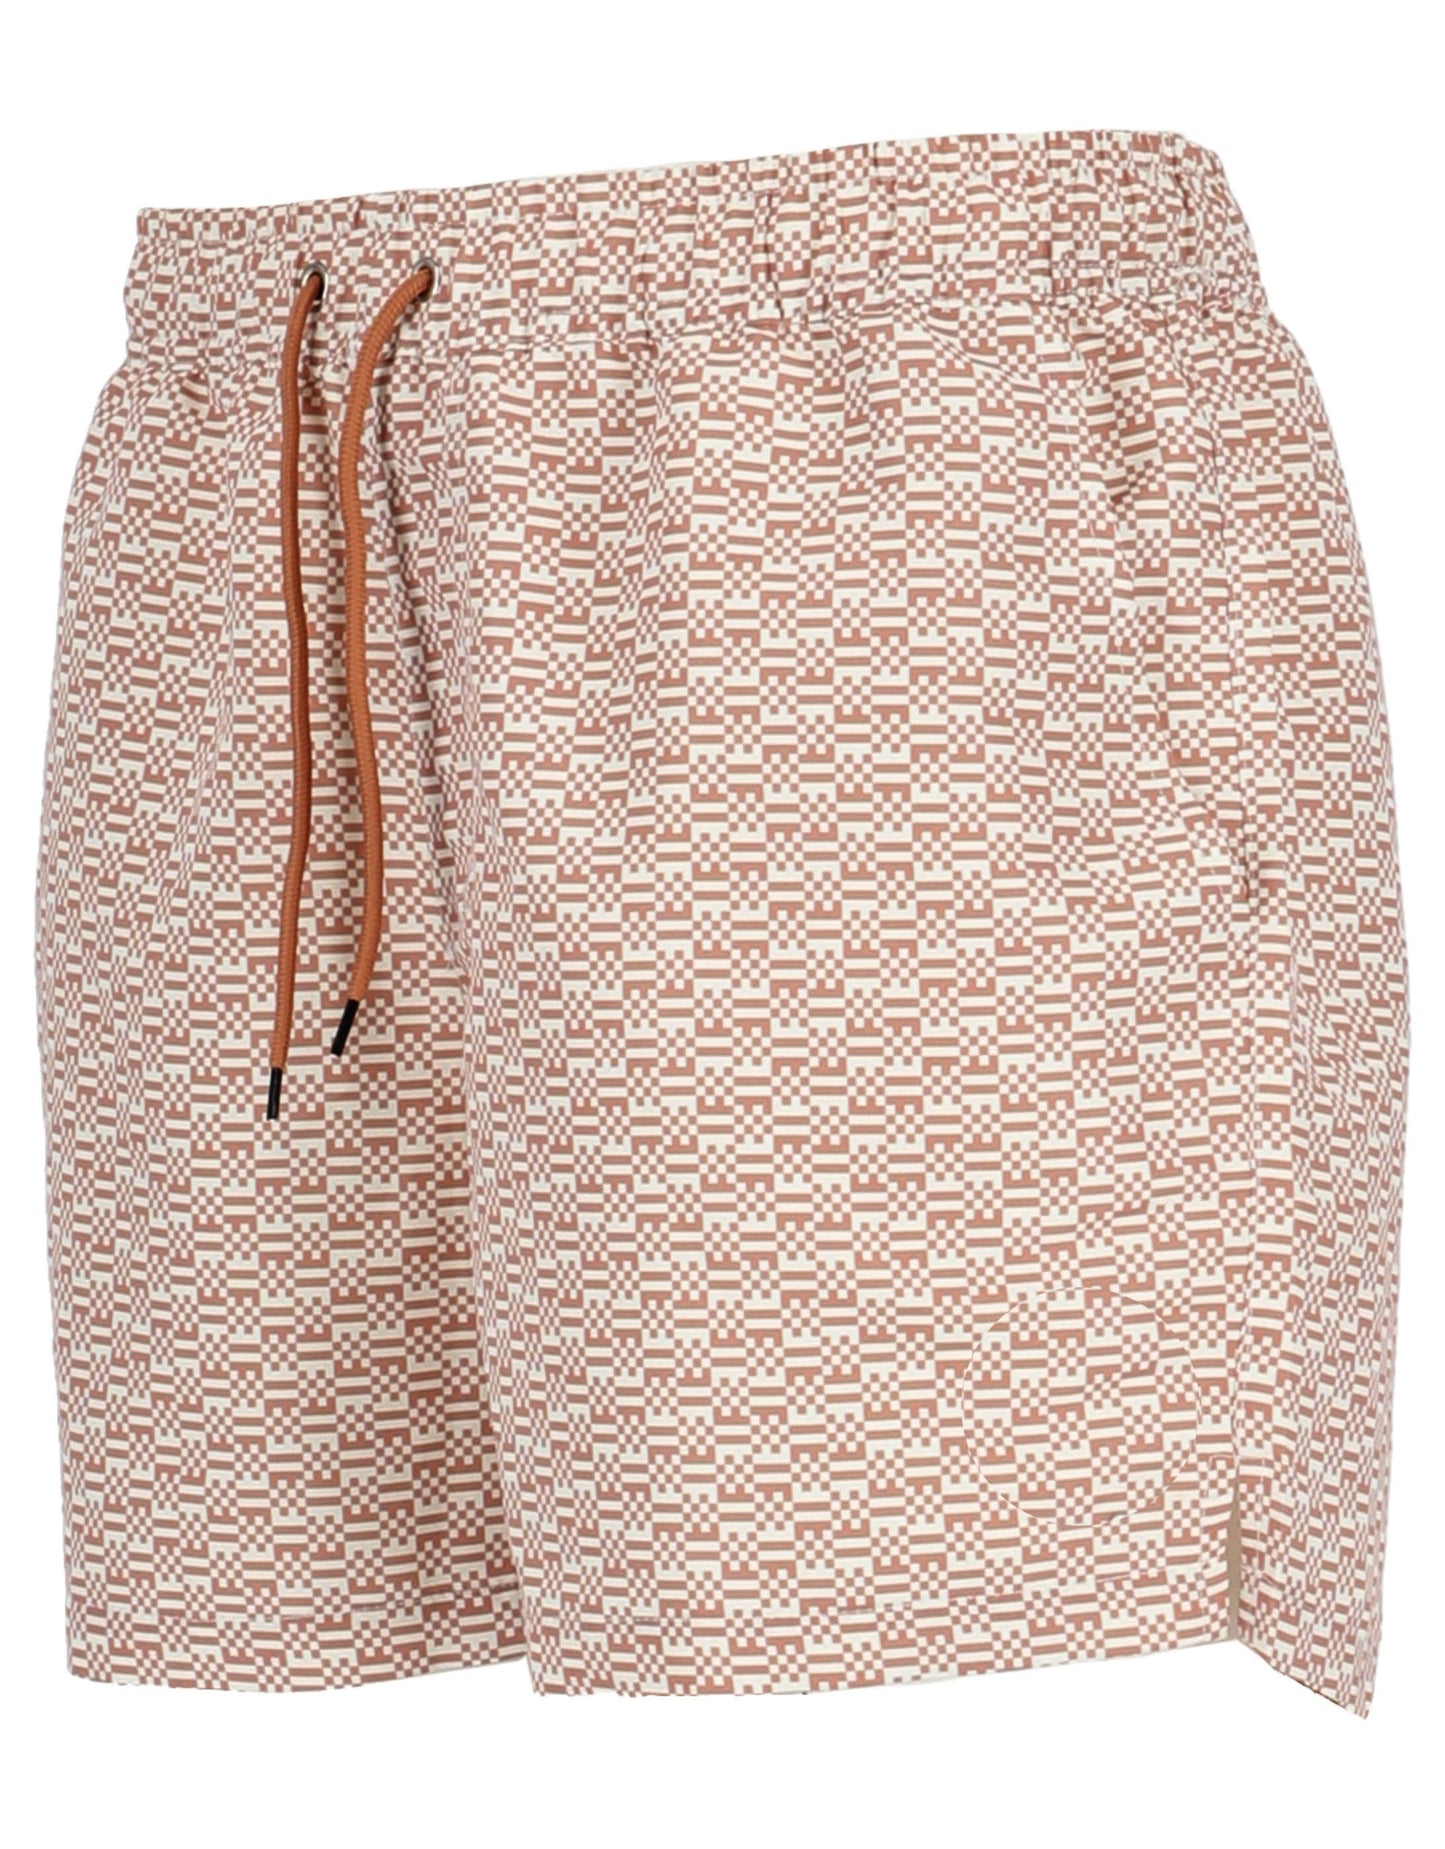 Mode - Swimming shorts Dust pink